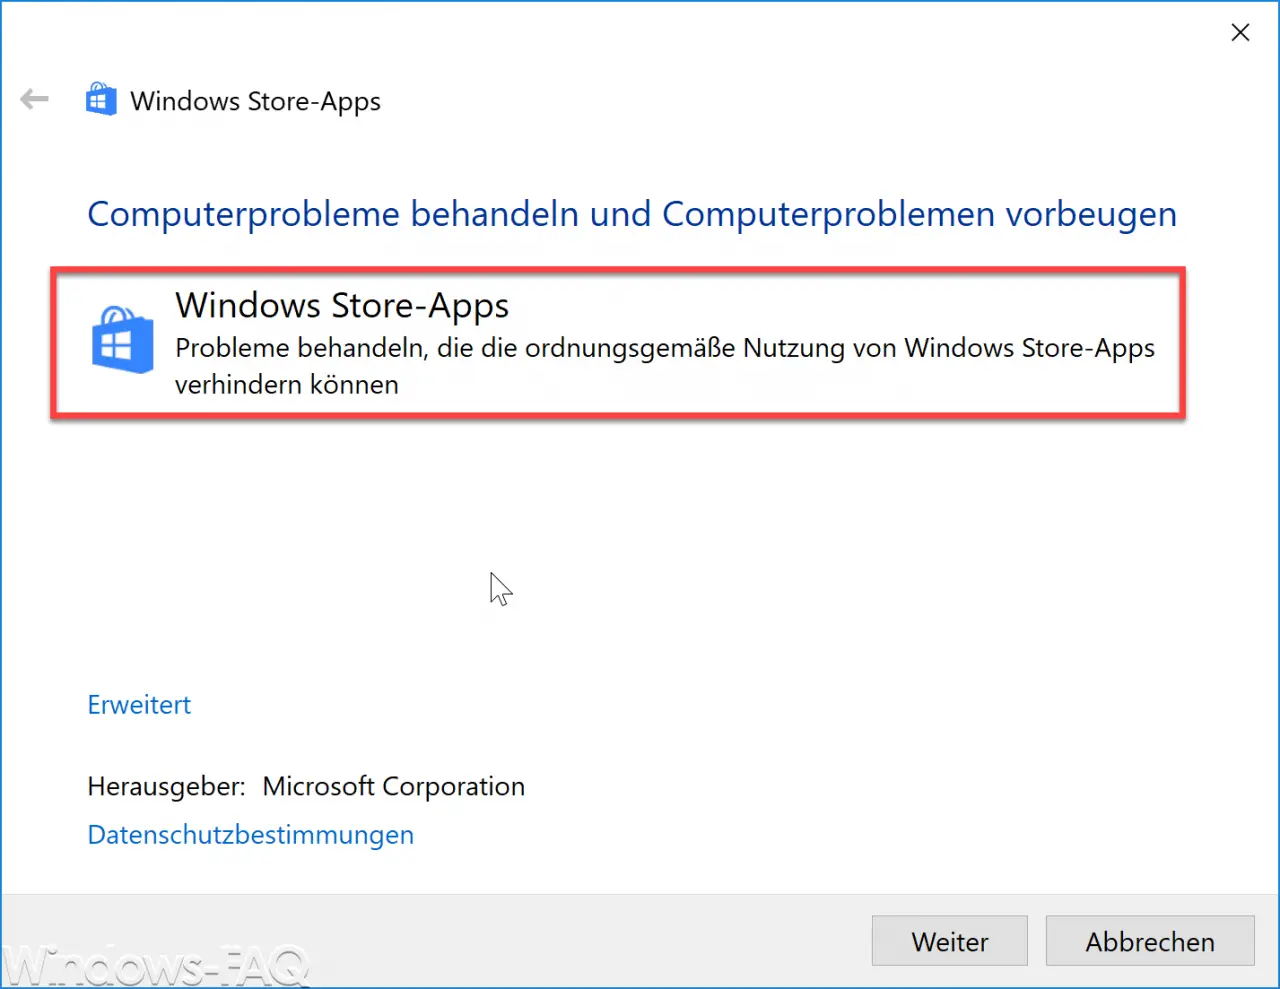 Windows Store Apps handle problems